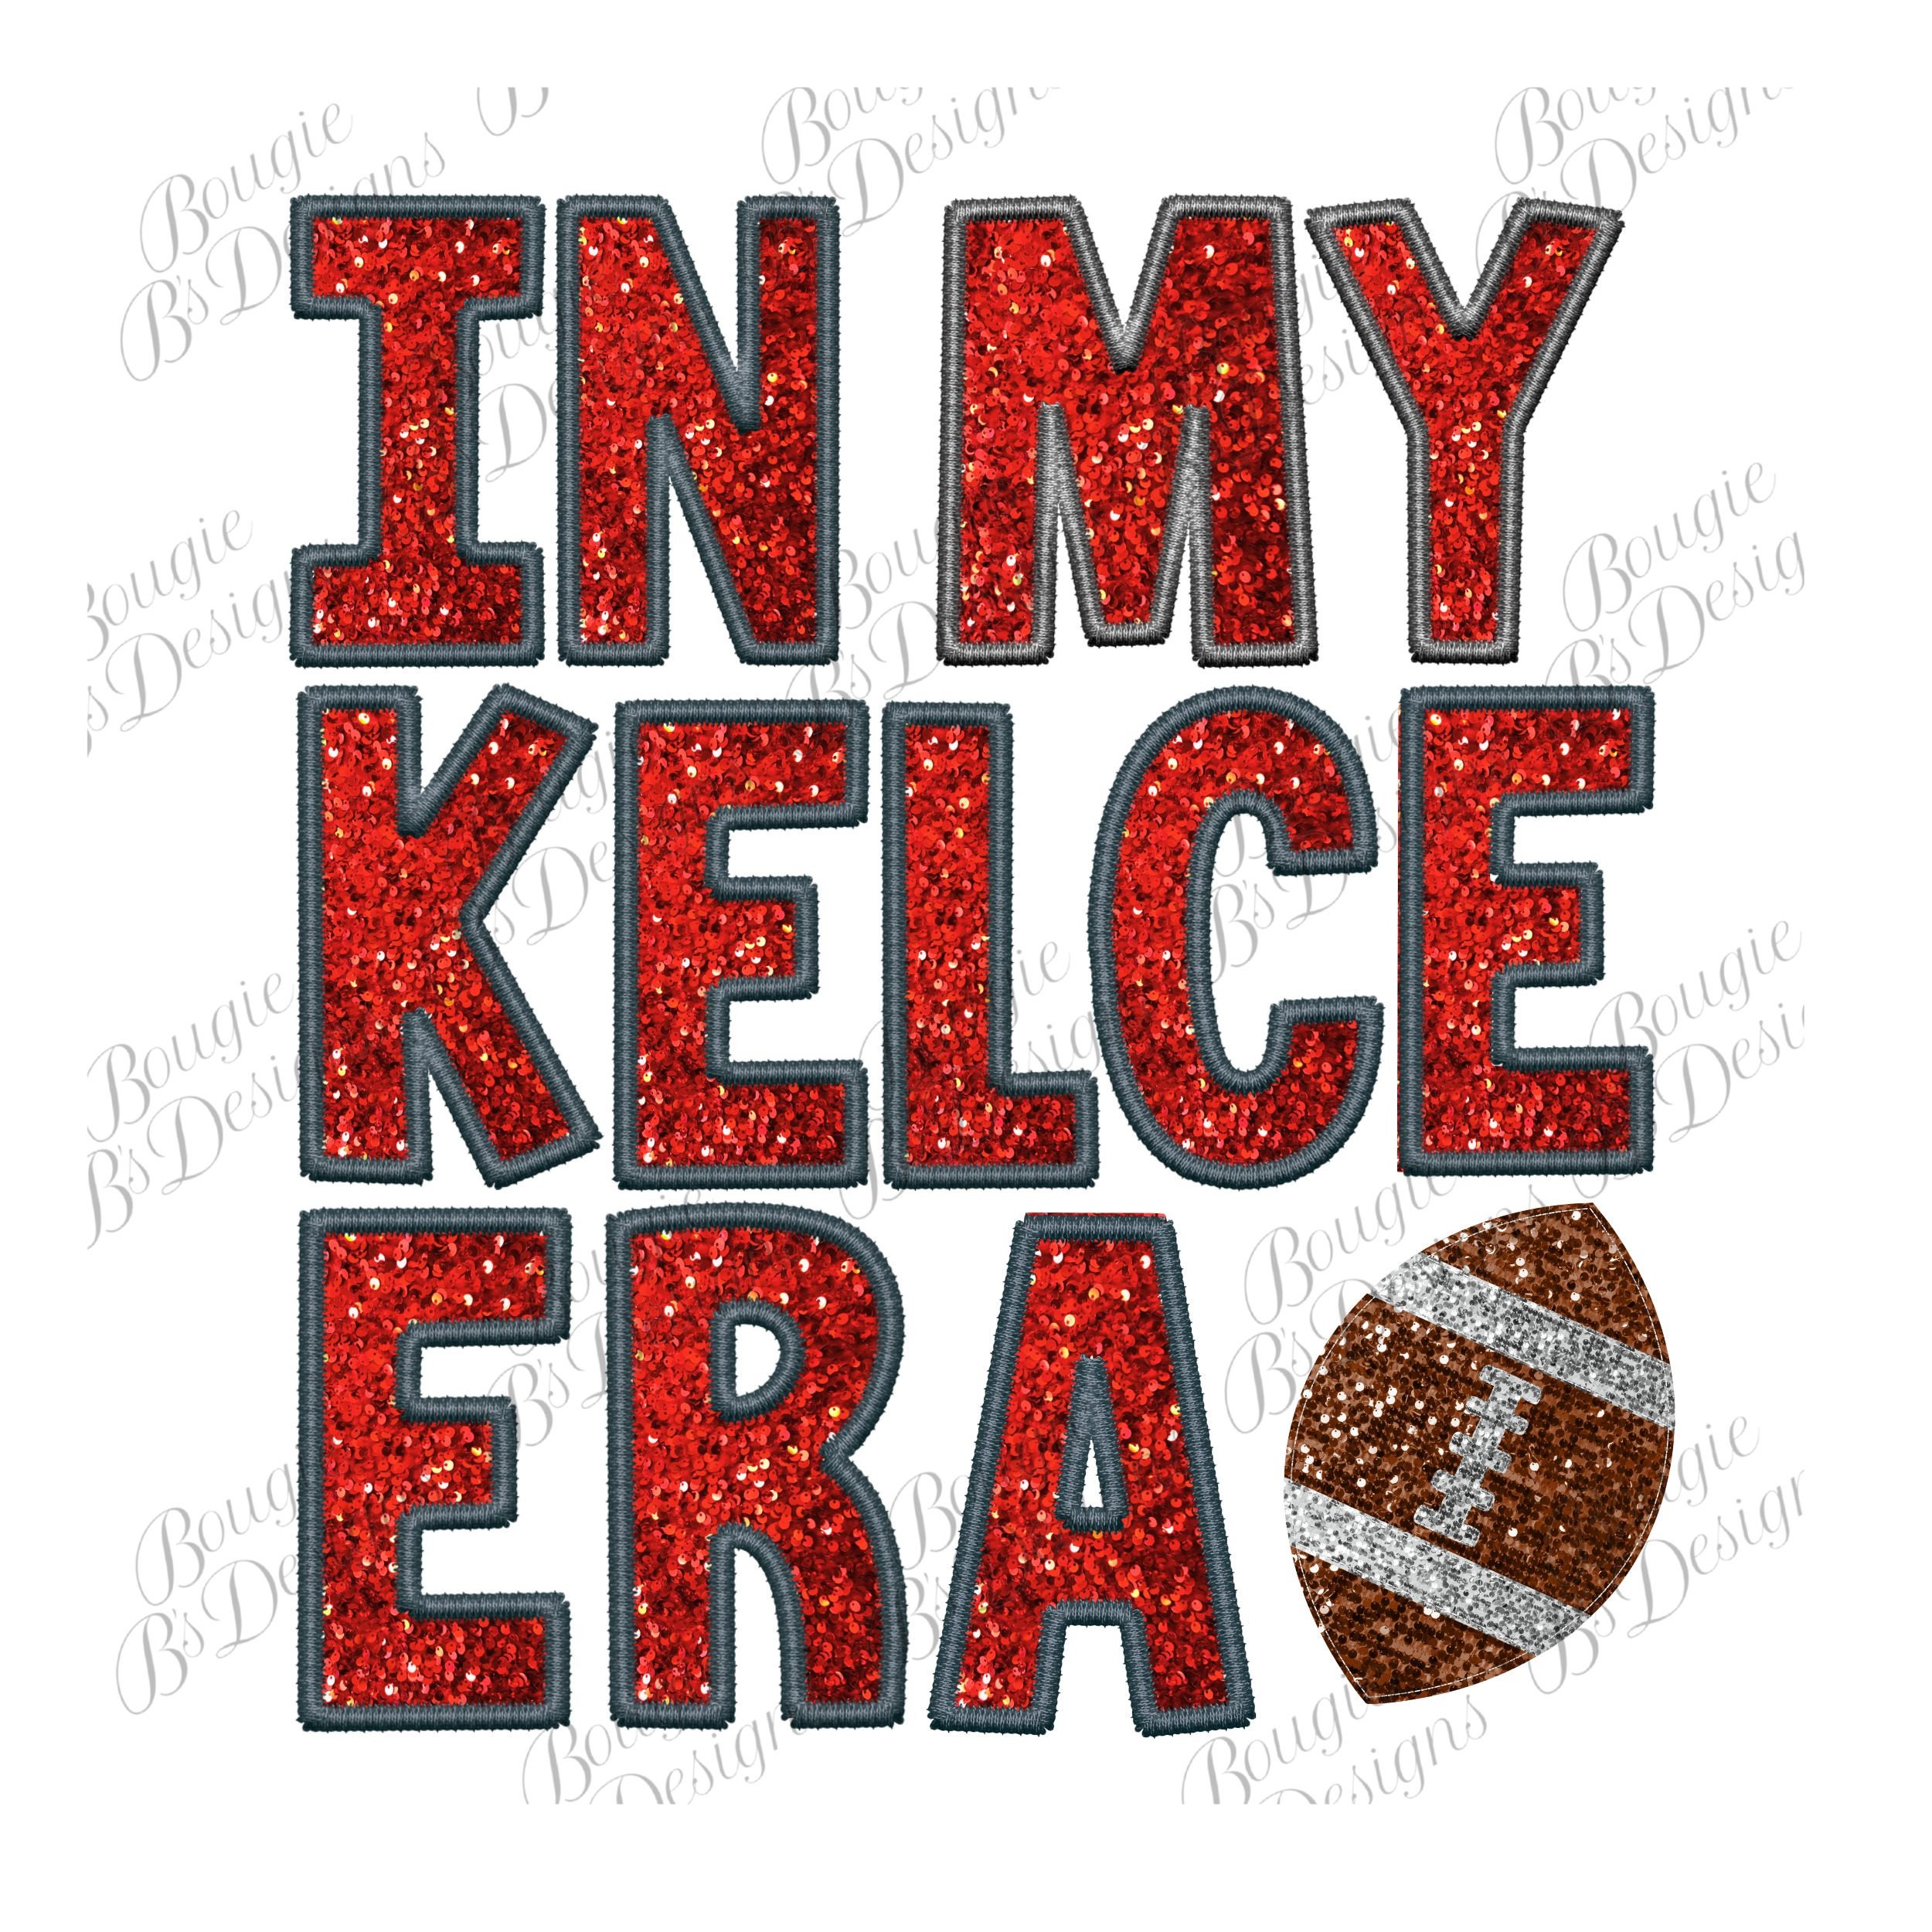 In My Travis Kelce Era Shirt Sequins PNG, Embroidered, Instant Download,  Cheifs, Cricut Cut File, Sequins 